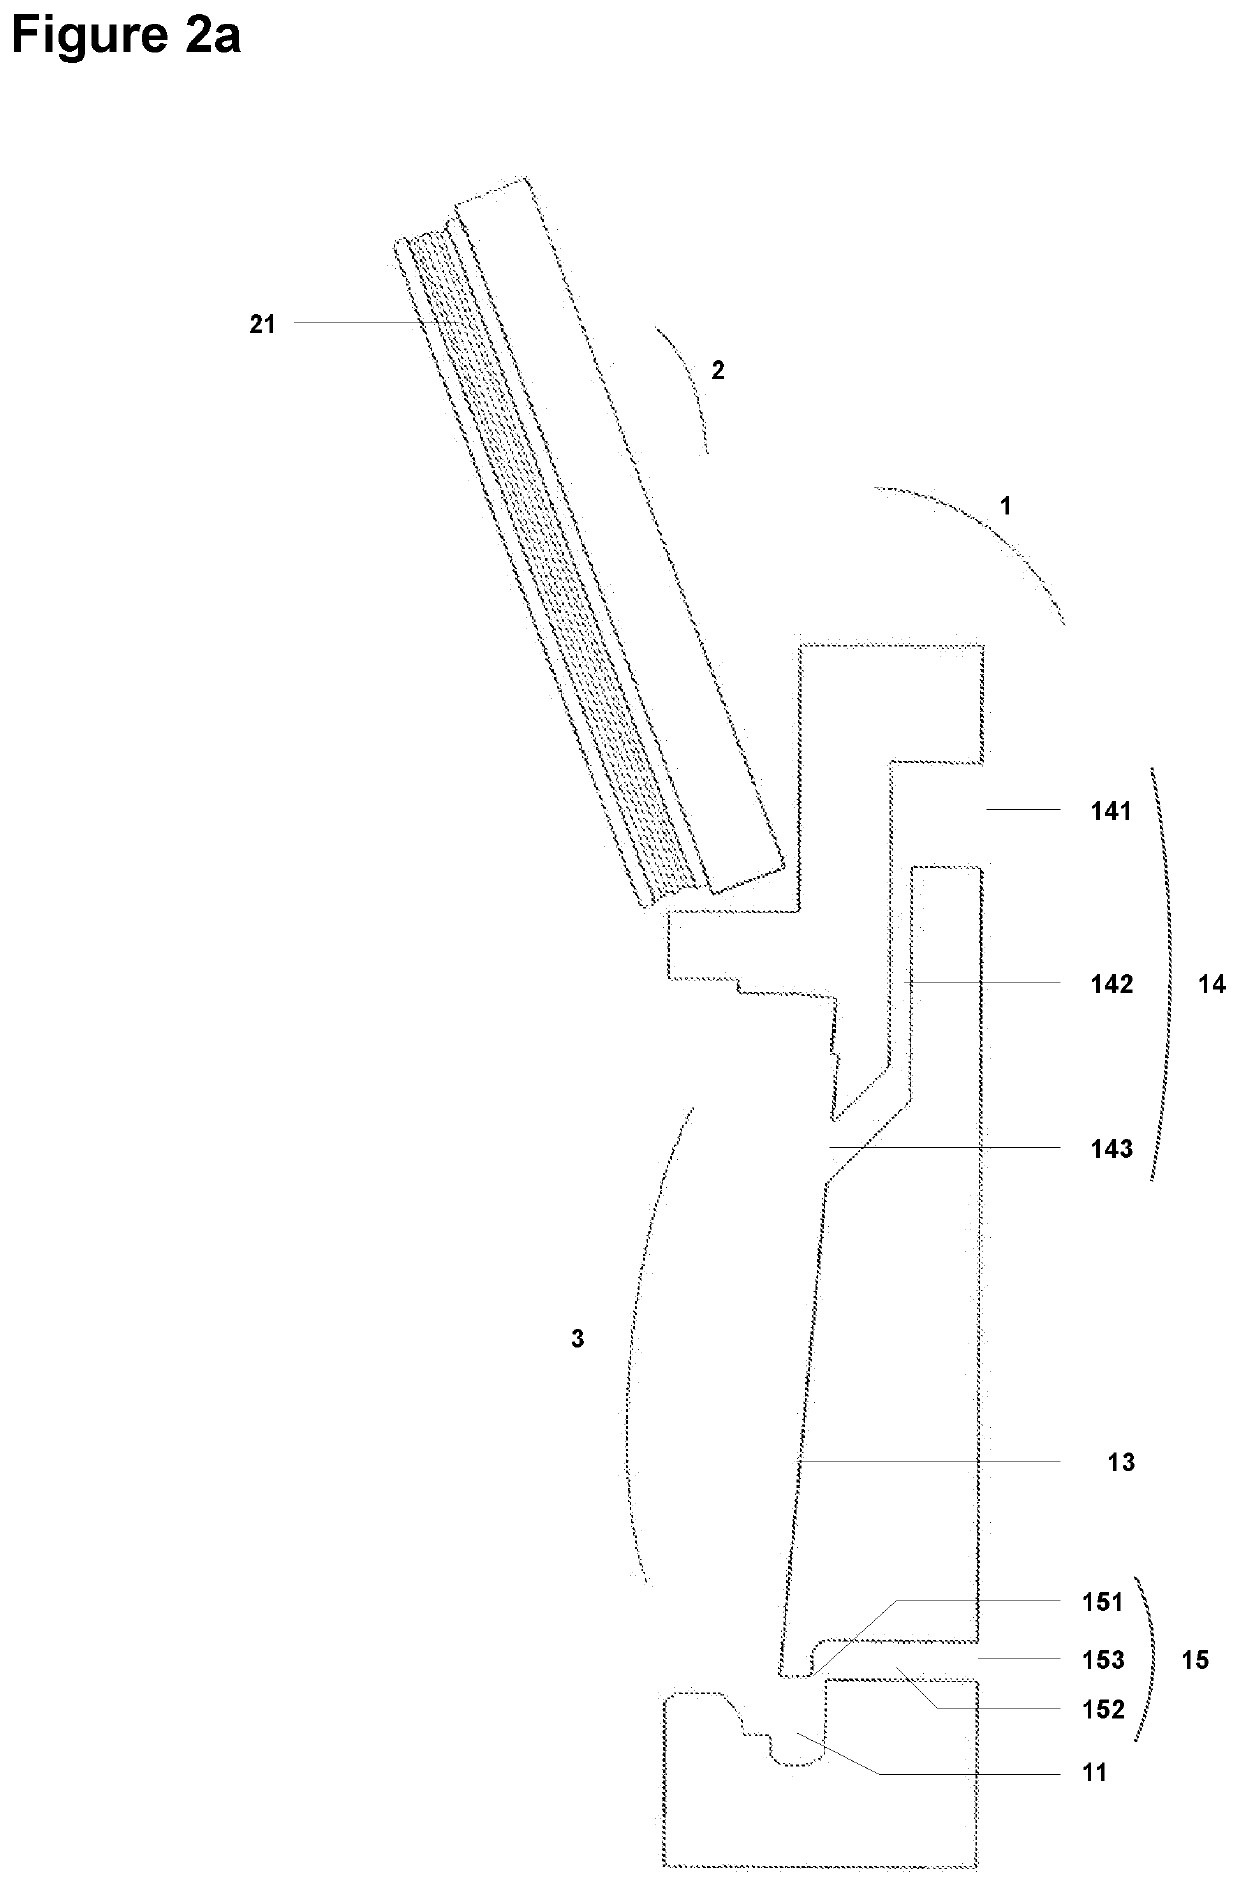 Method And Apparatus For Automatic Chromatography Of Thin-Layer Plates